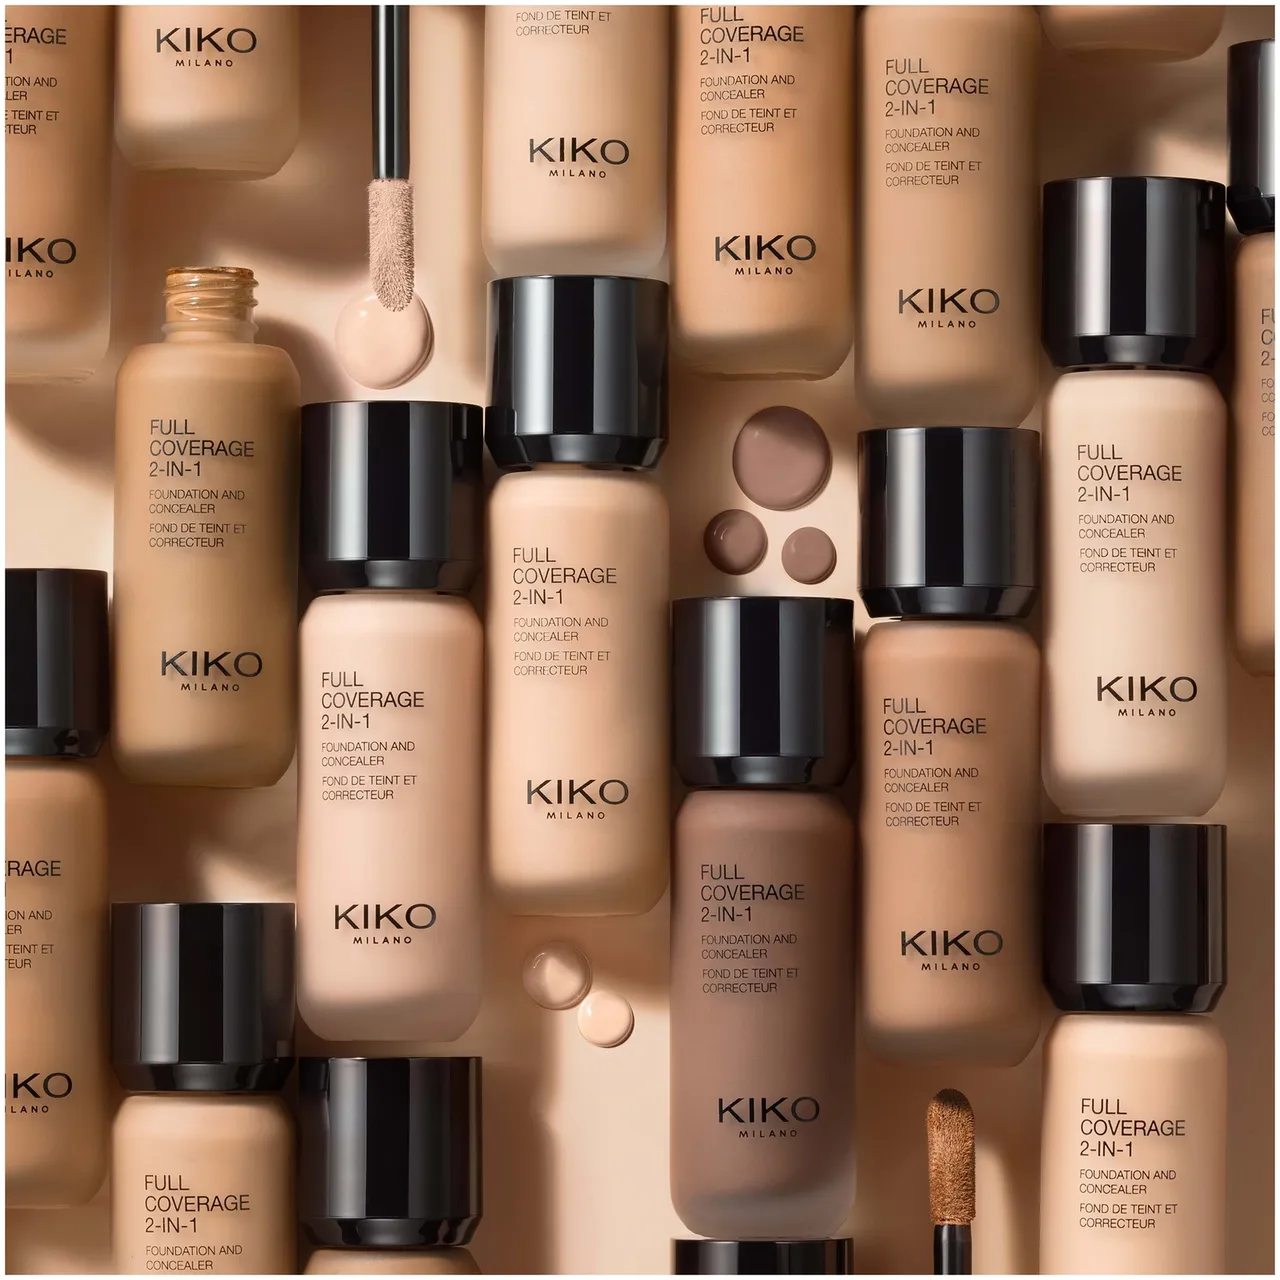 KIKO Milano Full Coverage 2-in-1 Foundation and Concealer 25ml (Various Shades) - 60 Neutral